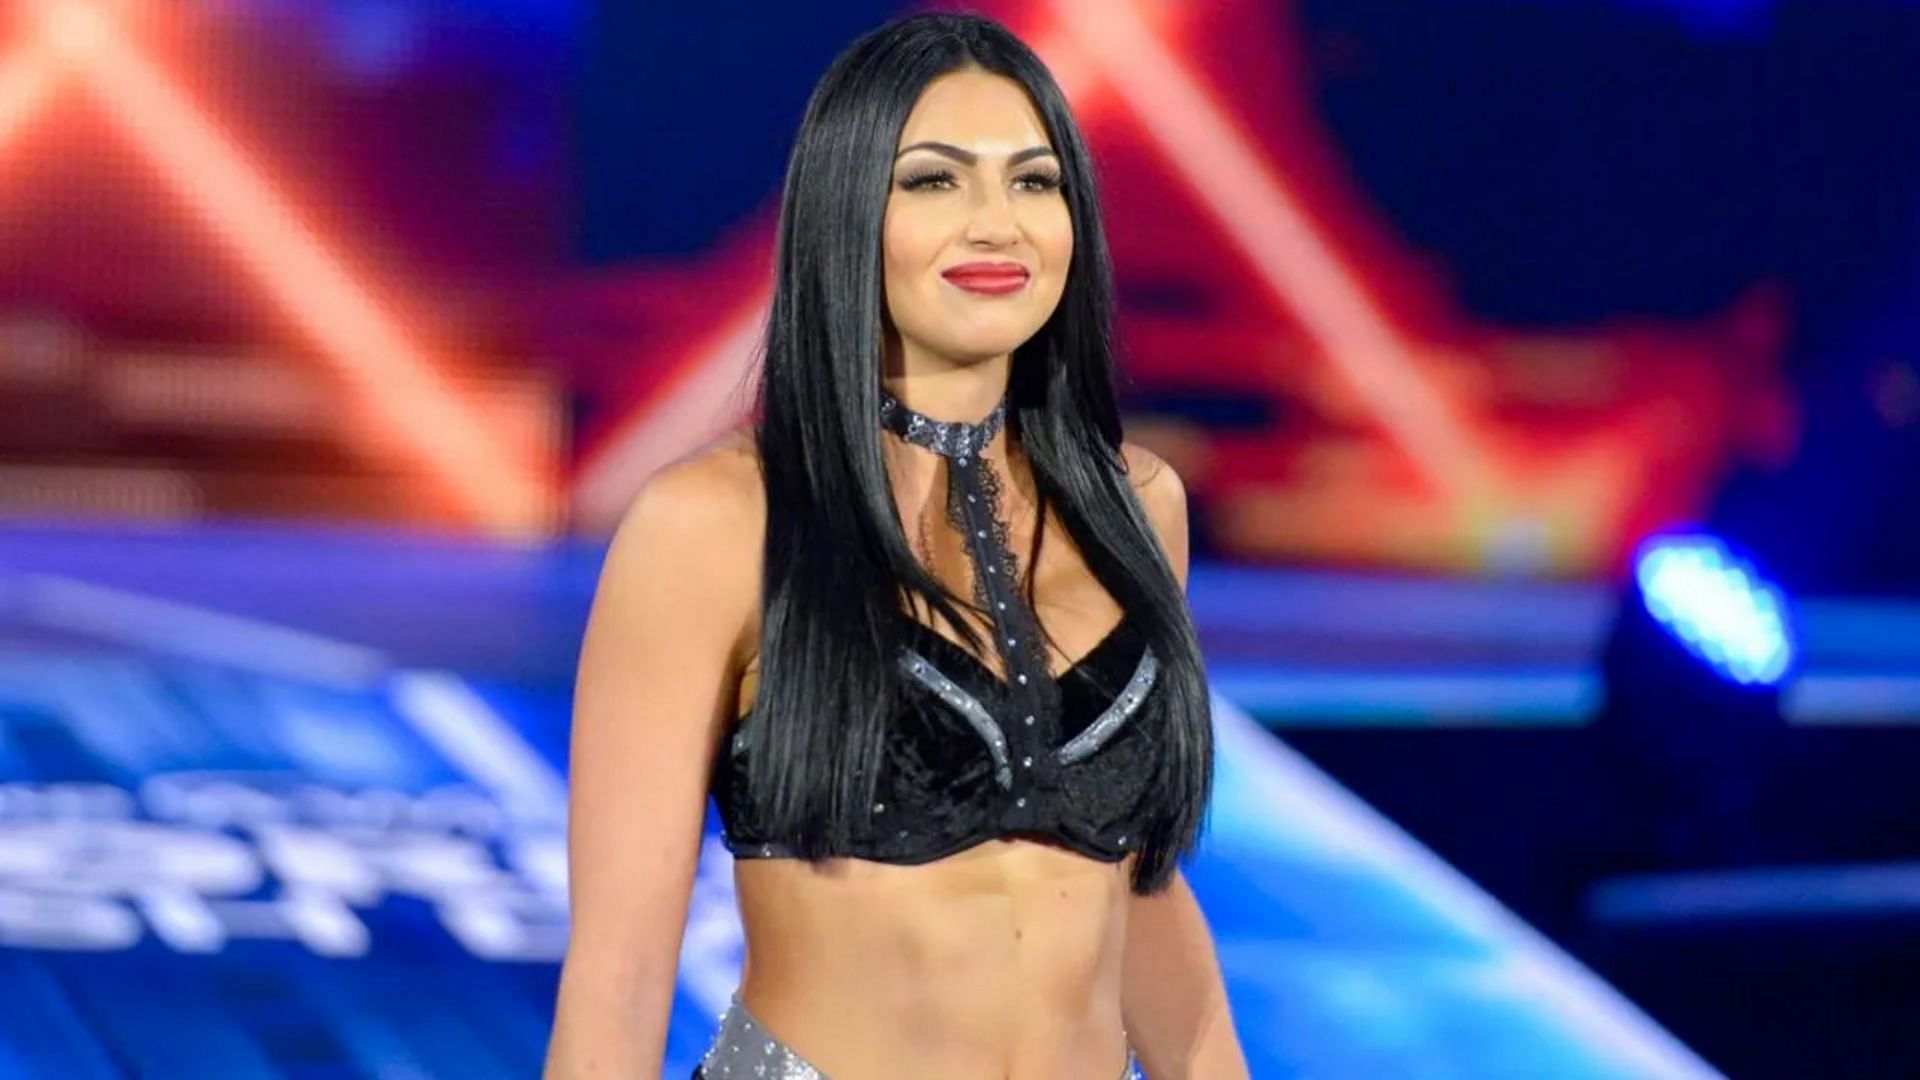 Billie Kay (Jessica McKay) was released from WWE in 2021